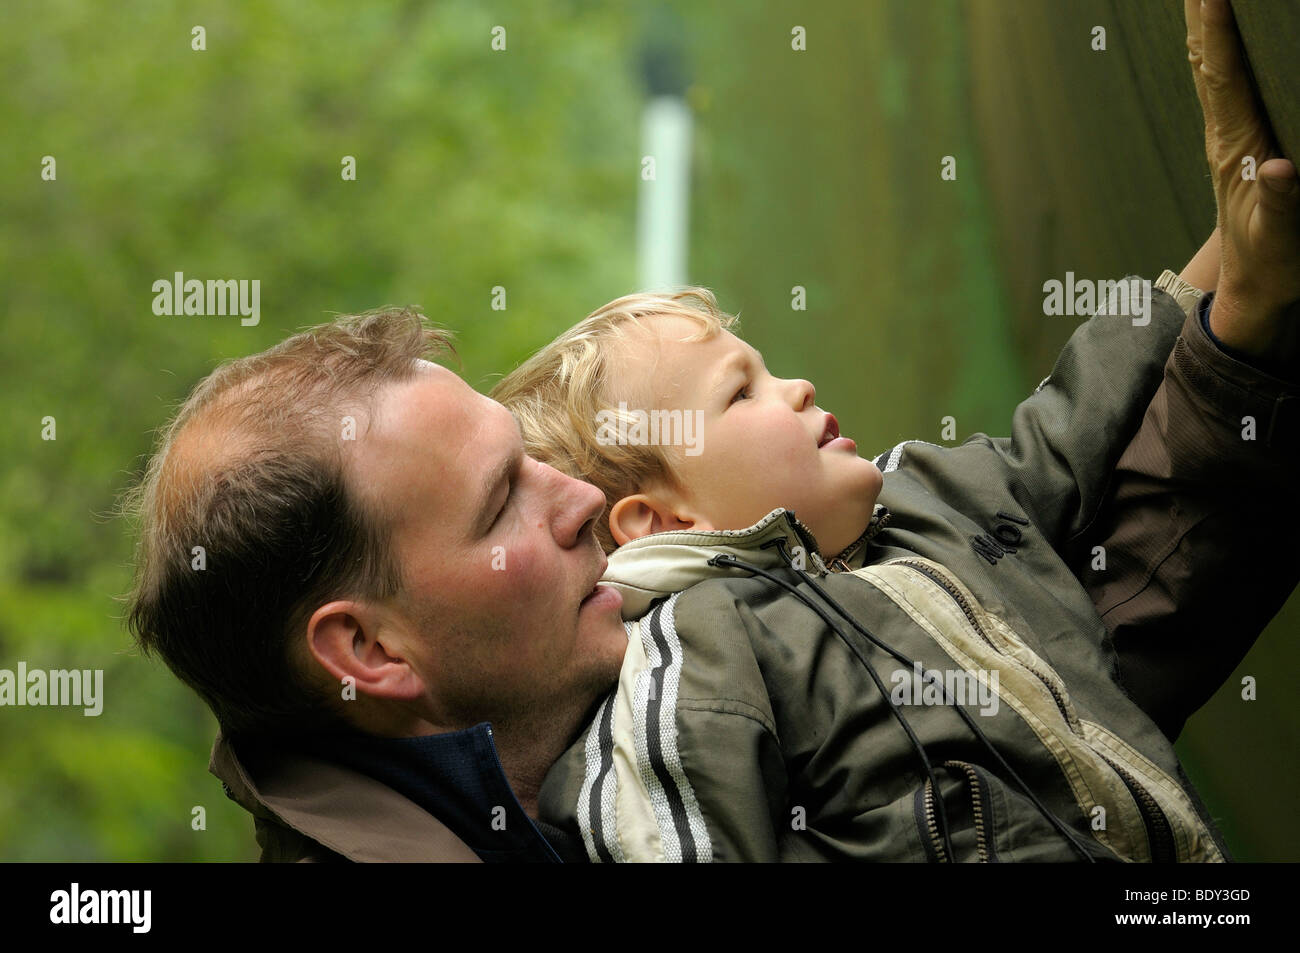 Father and son, 3 Stock Photo